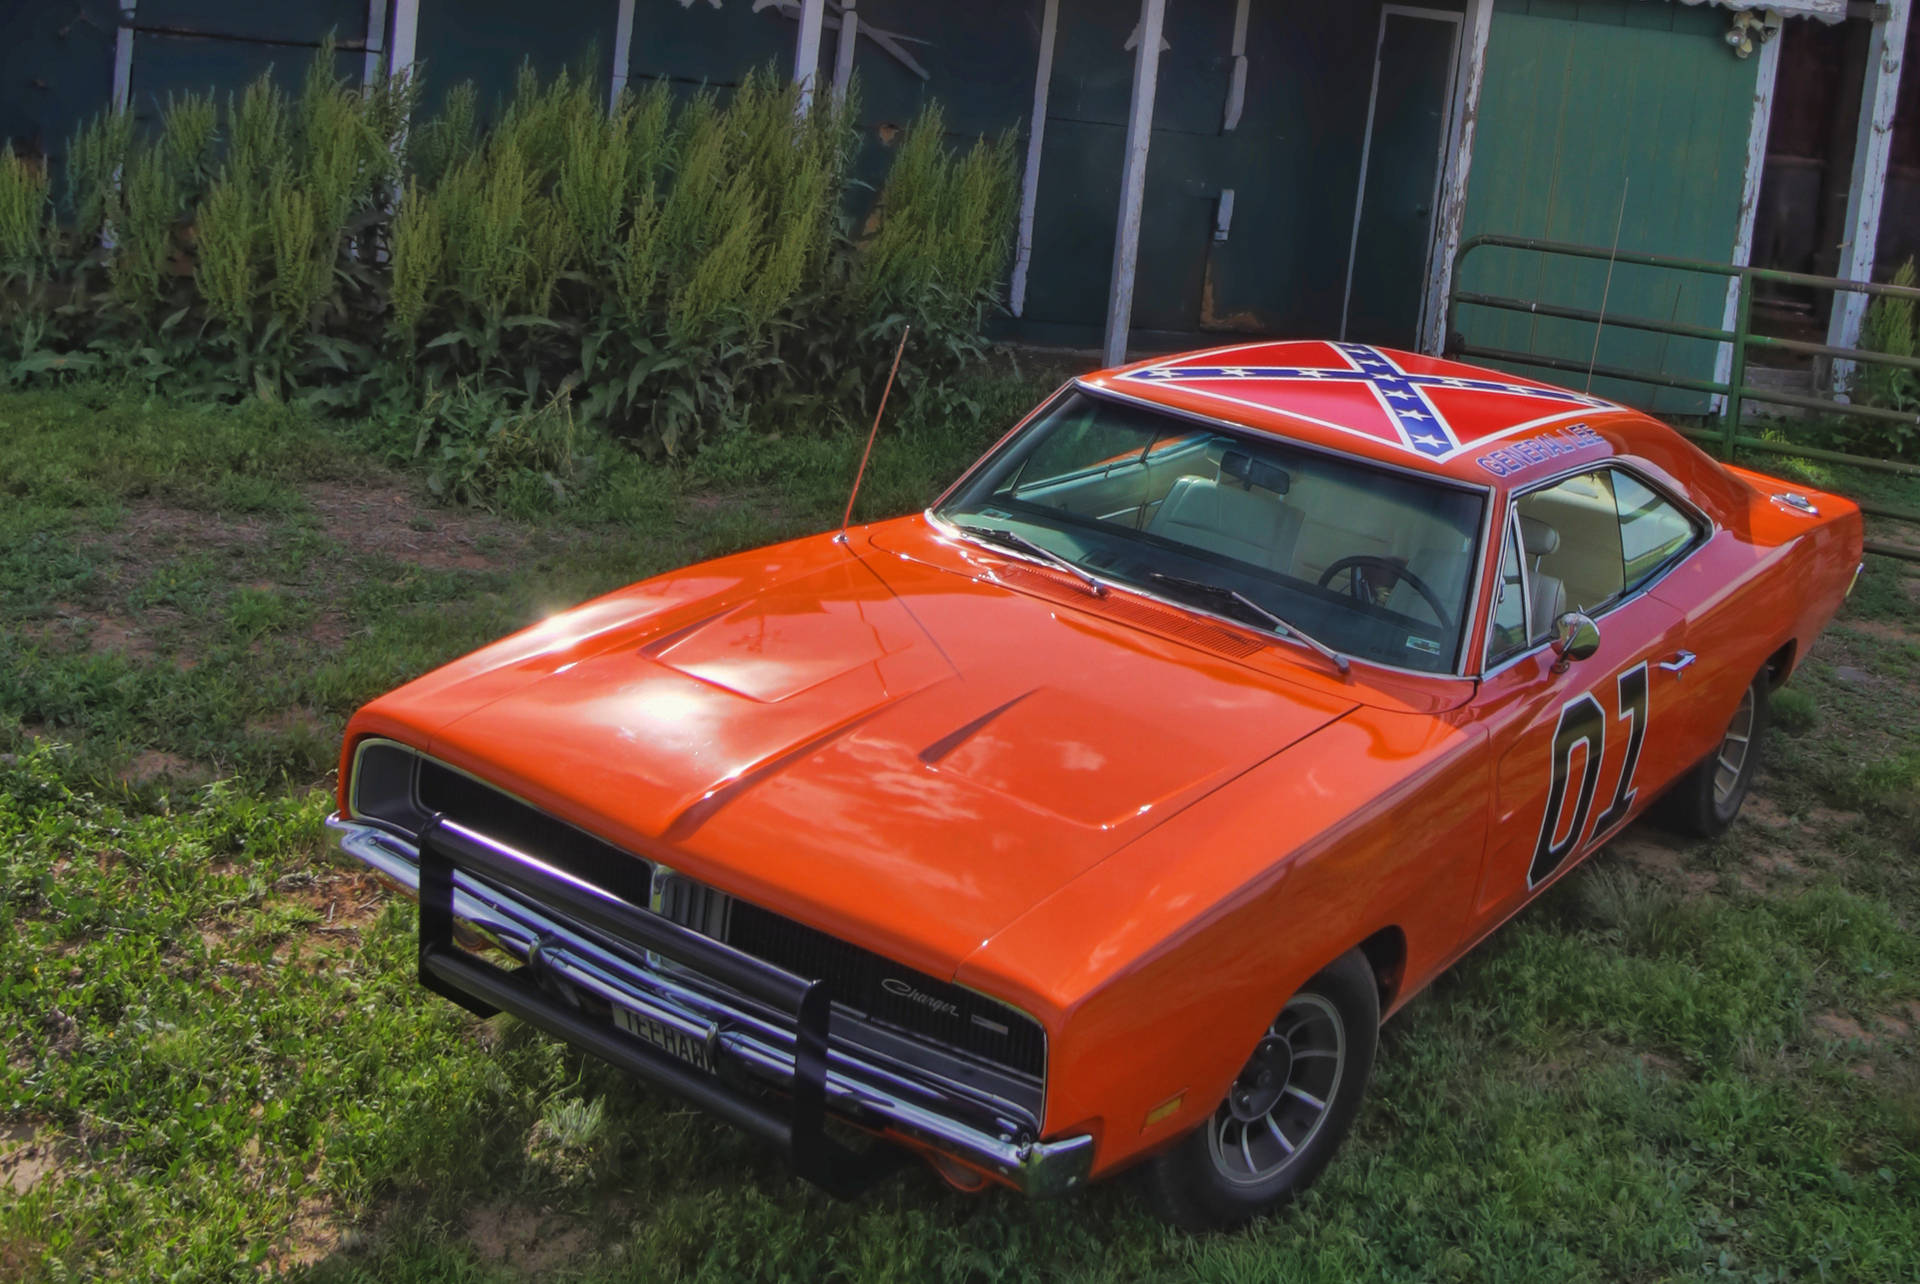 An Orange Dodge Charger Parked In The Grass Wallpaper